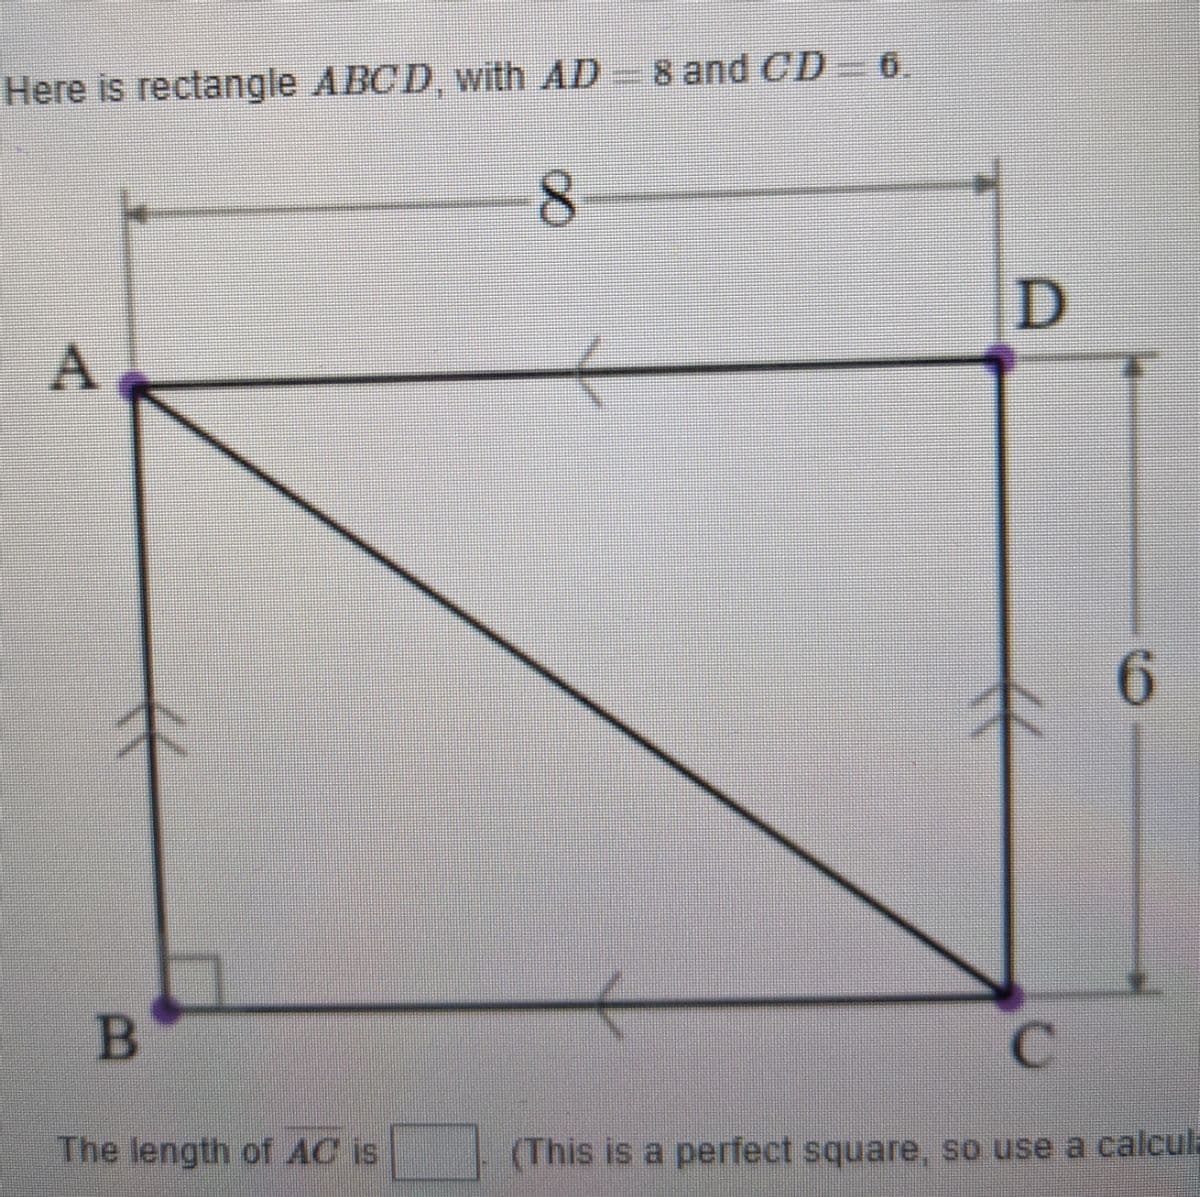 Here is rectangle ABCD, with AD 8 and CD 6.
8.
6.
The length of AC is
(This is a perfect square, so use a calcula
